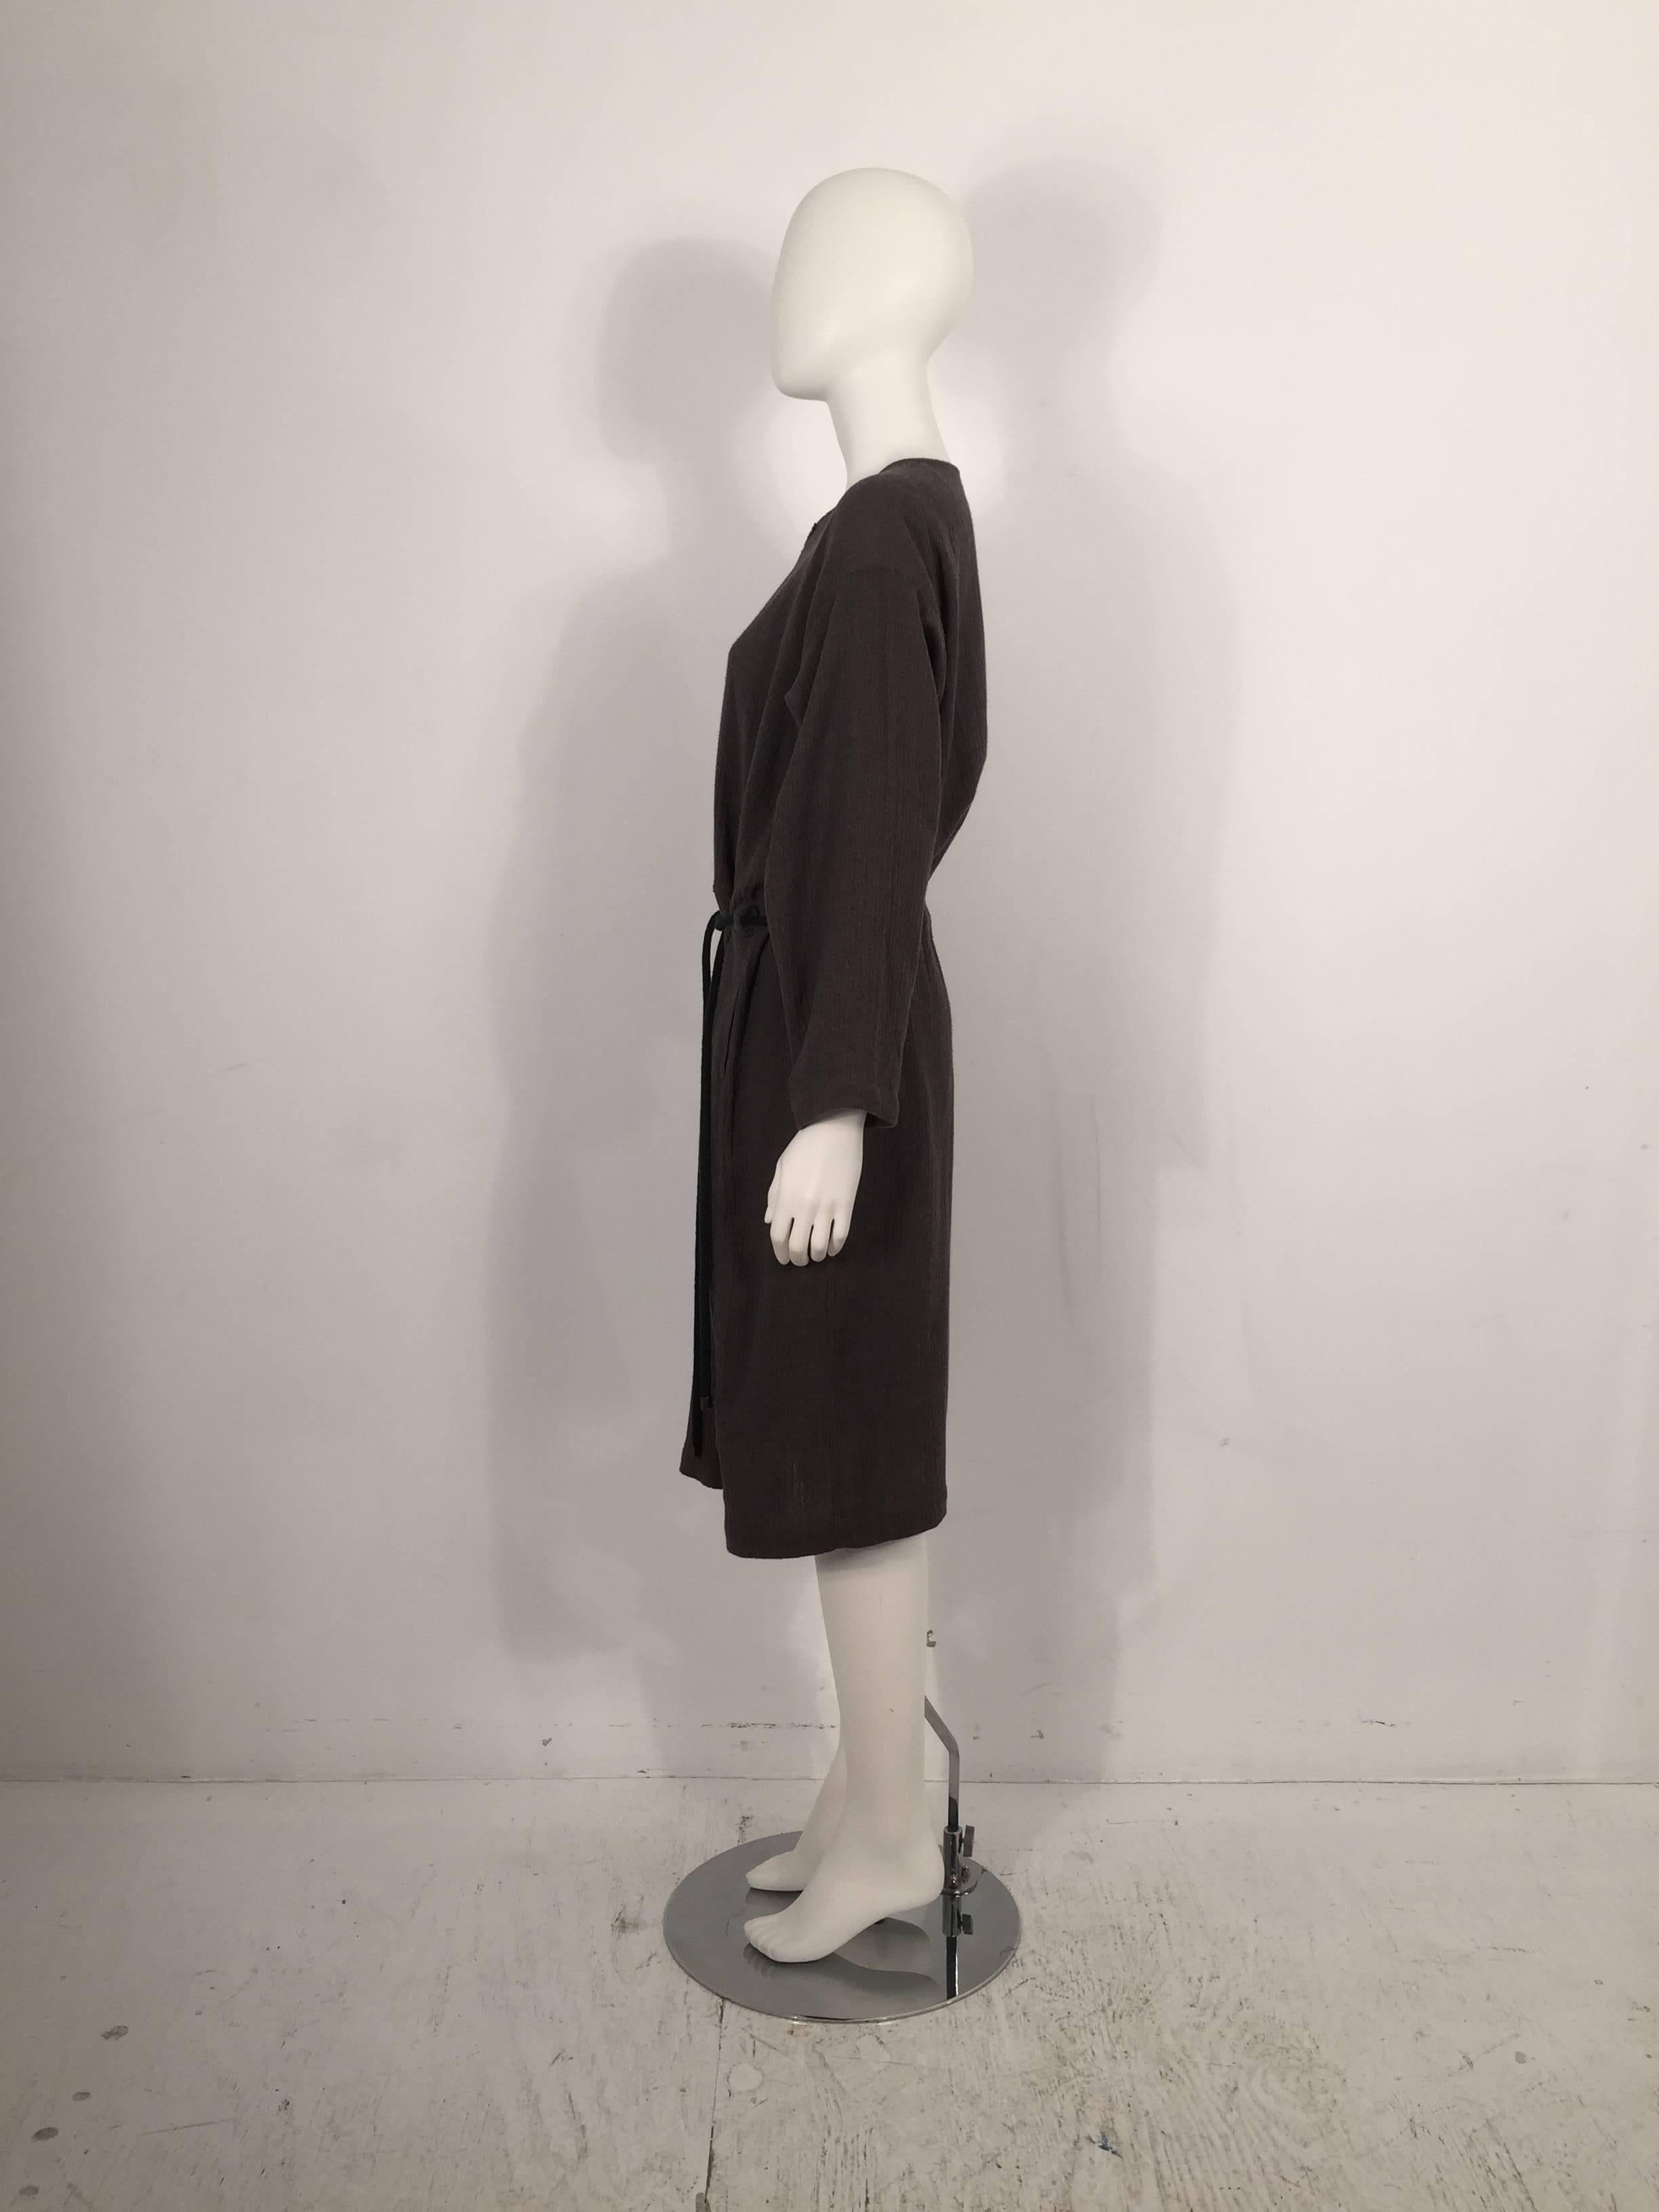 Issey Miyake Plantation Obi Dress In Excellent Condition For Sale In New York, NY